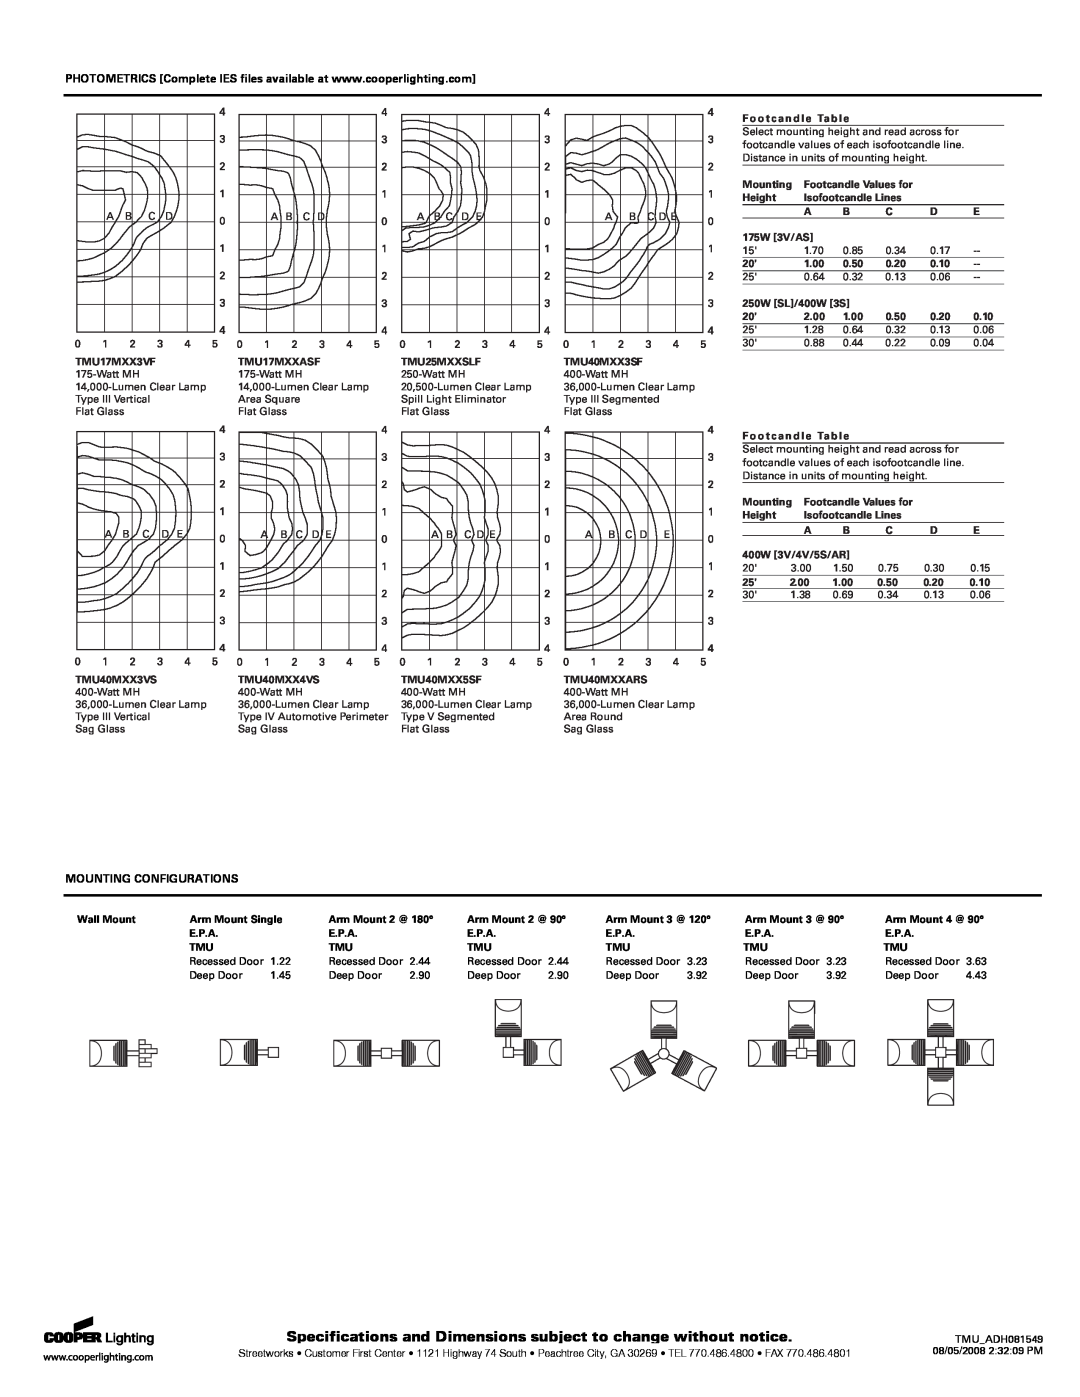 Cooper Lighting TMU40SWW3SF Specifications and Dimensions subject to change without notice, Mounting Configurations 